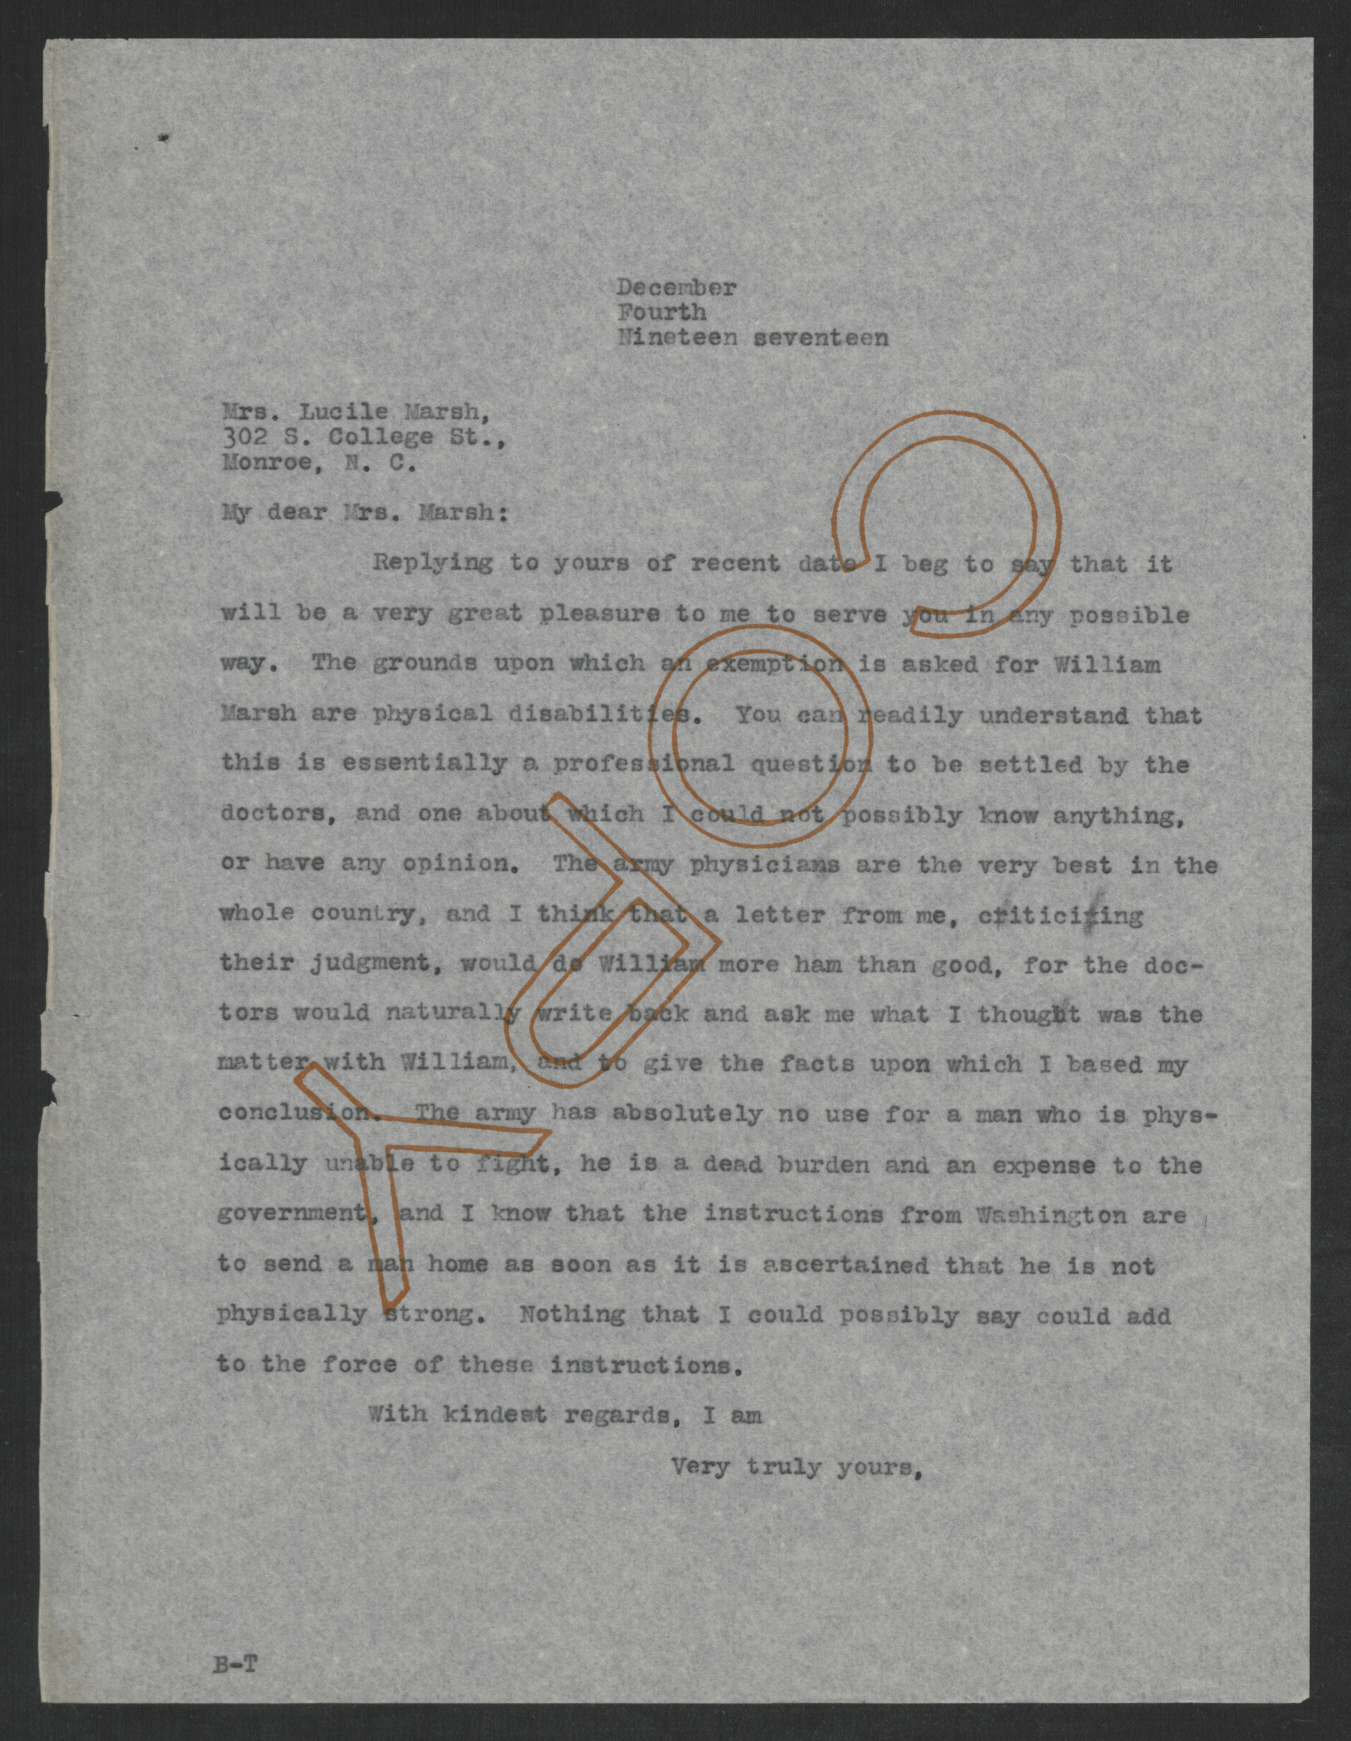 Letter from Thomas W. Bickett to Lucile Marsh, December 4, 1917